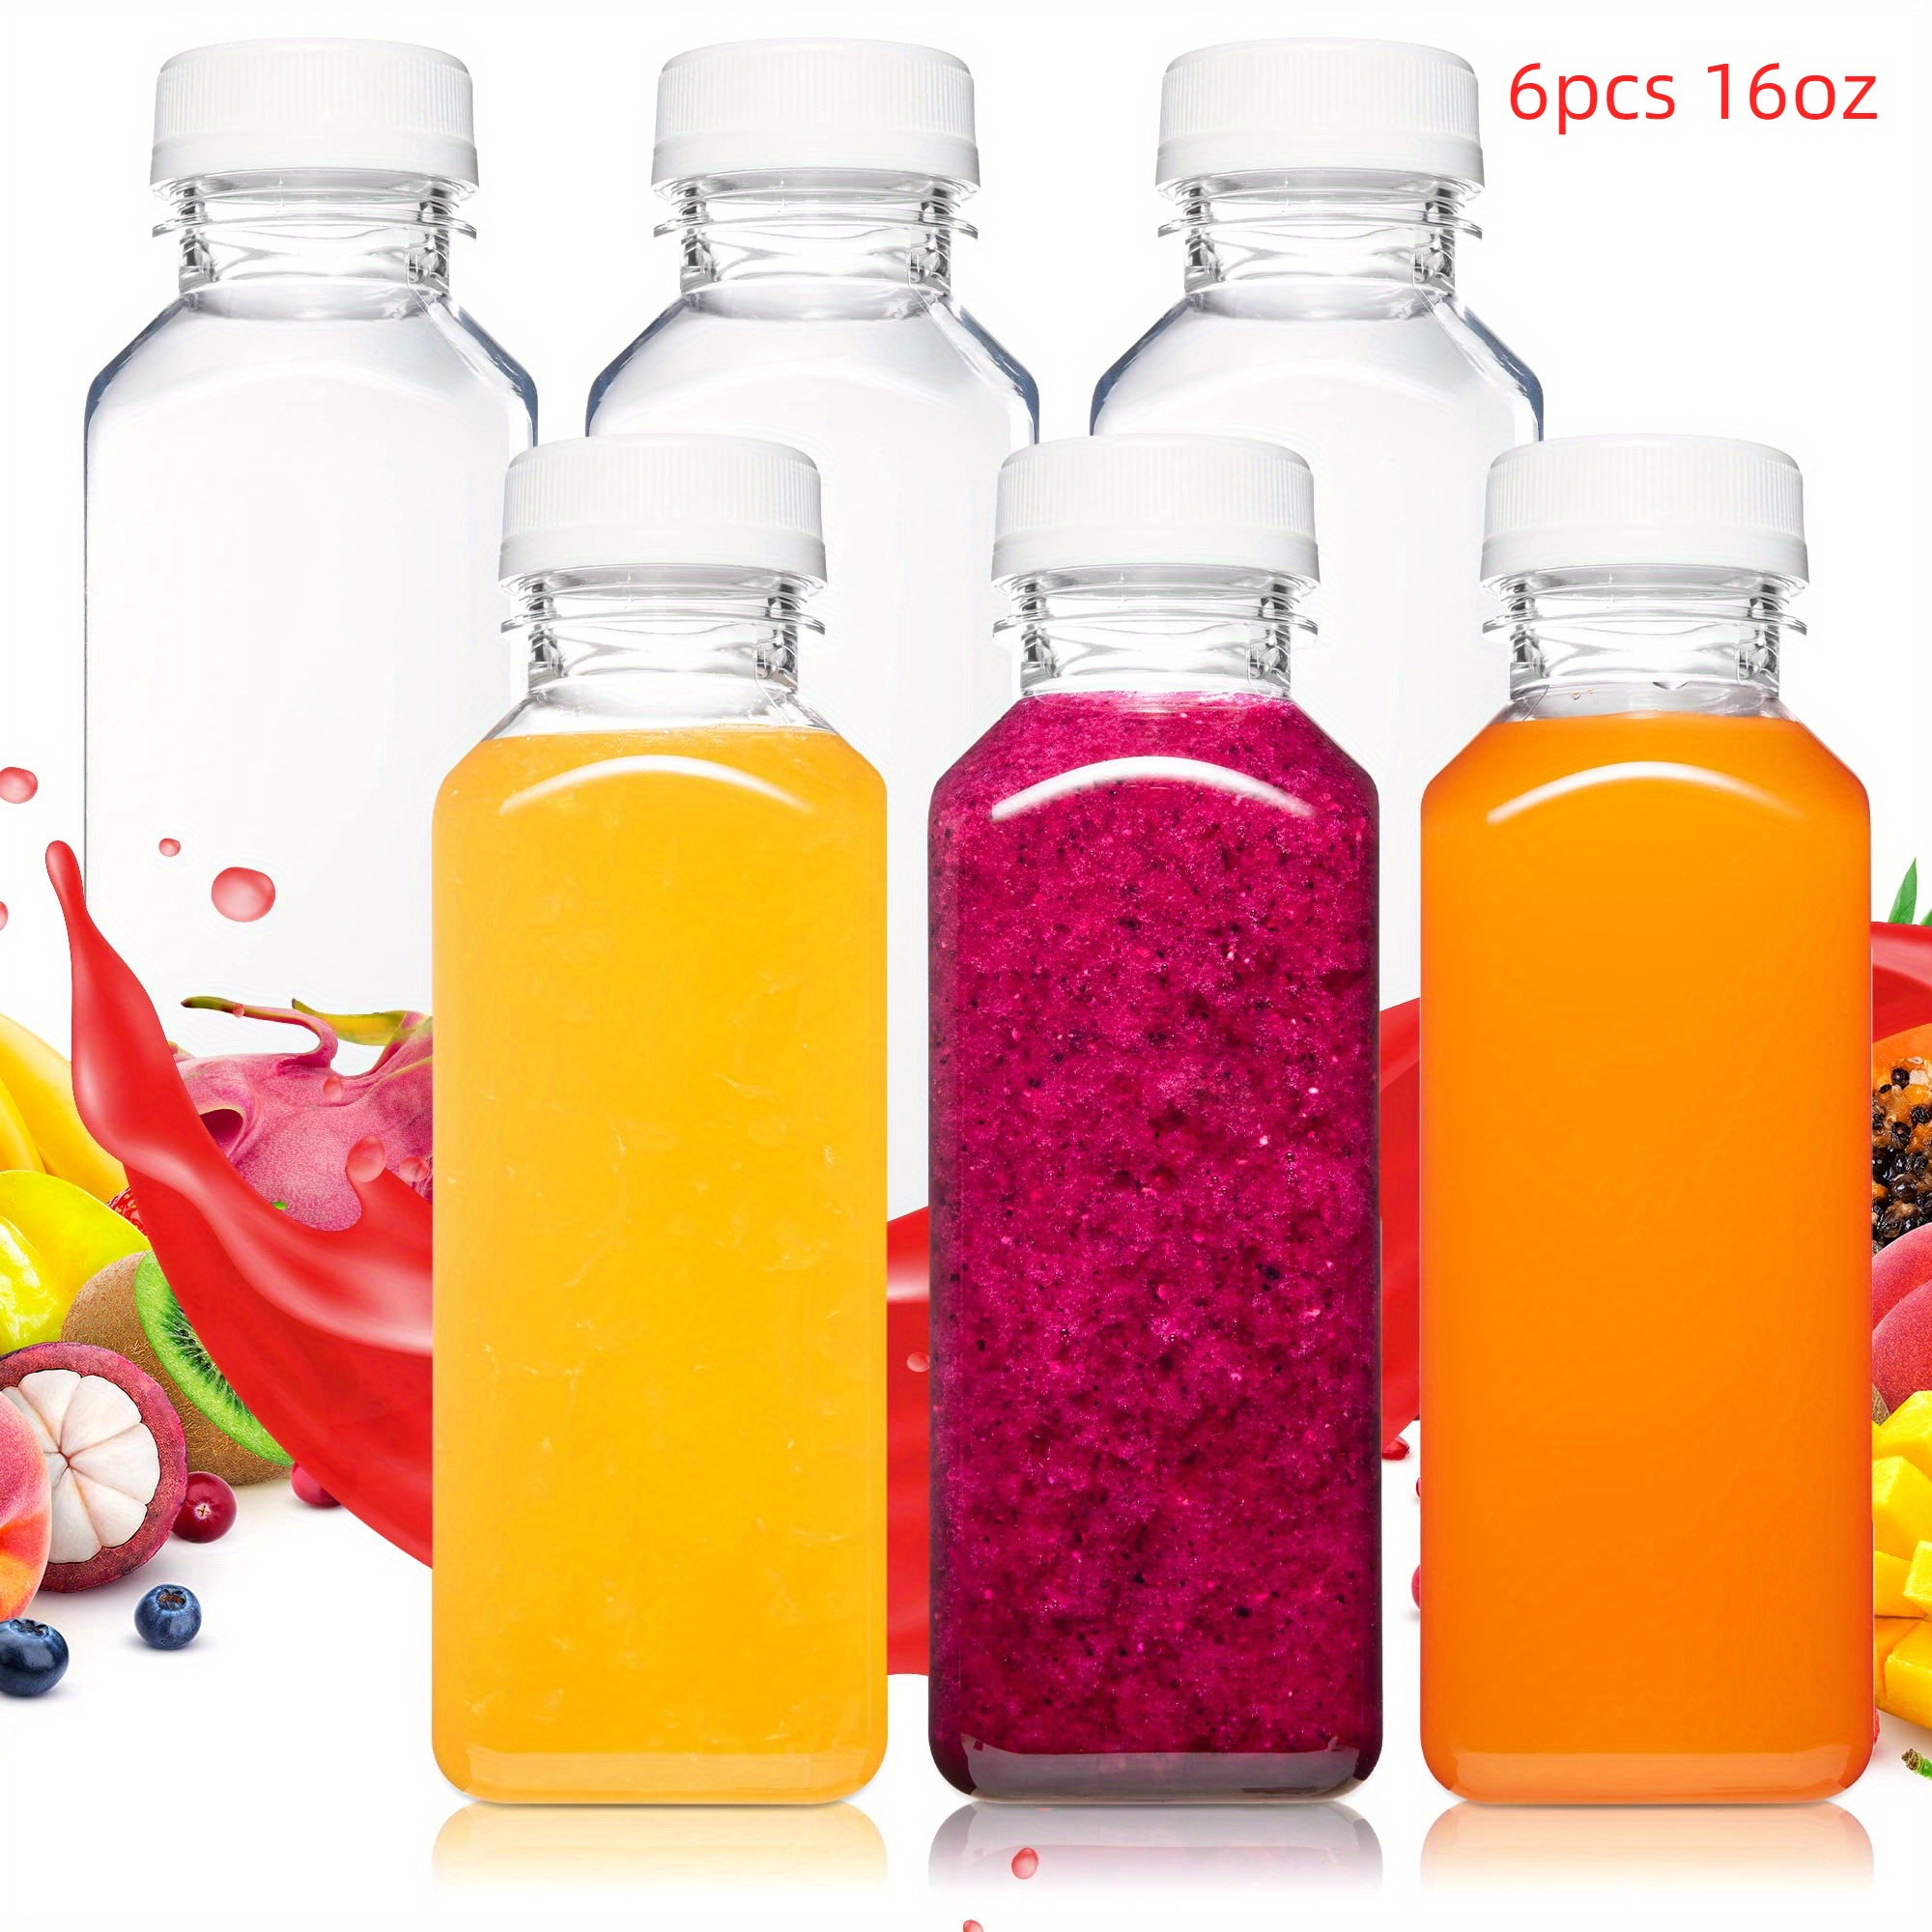 CUCUMI 10pcs 16oz Glass Juice Bottles with Lids, Reusable Juice Containers  Drinking Jars Water Cups …See more CUCUMI 10pcs 16oz Glass Juice Bottles